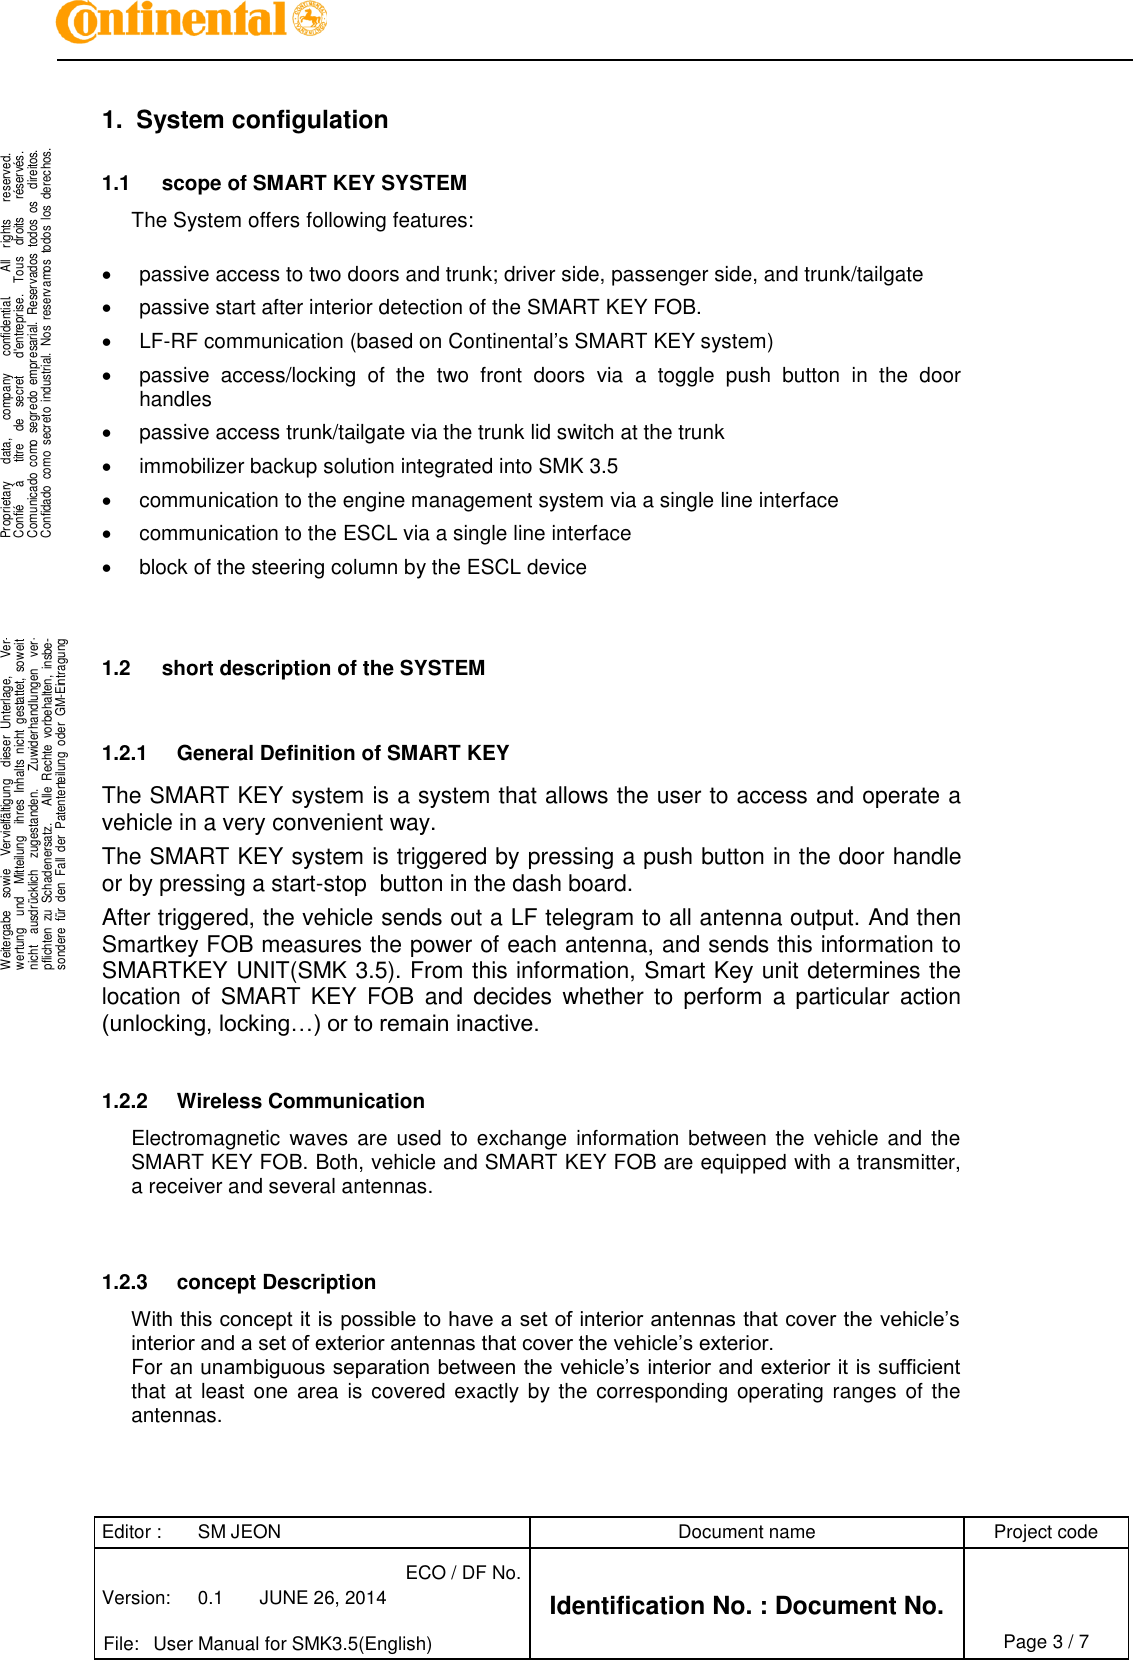 Editor : SM JEON Document name Project code Version: 0.1 JUNE 26, 2014 ECO / DF No. Identification No. : Document No.   File: User Manual for SMK3.5(English) Page 3 / 7     .Proprietary     data,      company      confidential.       All    rights      reserved.Confié      à      titre    de    secret      d&apos;entreprise.    Tous    droits      réservés.Comunicado  como  segredo  empresarial.  Reservados  todos  os    direitos.Confidado  como  secreto  industrial.  Nos  reservamos  todos  los  derechos. . .Weitergabe    sowie    Vervielfältigung    dieser  Unterlage,      Ver-wertung    und    Mitteilung    ihres  Inhalts  nicht  gestattet,  soweitnicht    ausdrücklich    zugestanden.      Zuwiderhandlungen    ver-pflichten  zu  Schadenersatz.      Alle  Rechte  vorbehalten,  insbe-sondere  für  den  Fall  der  Patenterteilung  oder  GM-Eintragung..  1.  System configulation 1.1  scope of SMART KEY SYSTEM The System offers following features:    passive access to two doors and trunk; driver side, passenger side, and trunk/tailgate   passive start after interior detection of the SMART KEY FOB.  LF-RF communication (based on Continental’s SMART KEY system)   passive  access/locking  of  the  two  front  doors  via  a  toggle  push  button  in  the  door handles   passive access trunk/tailgate via the trunk lid switch at the trunk   immobilizer backup solution integrated into SMK 3.5   communication to the engine management system via a single line interface   communication to the ESCL via a single line interface   block of the steering column by the ESCL device   1.2  short description of the SYSTEM  1.2.1  General Definition of SMART KEY The SMART KEY system is a system that allows the user to access and operate a vehicle in a very convenient way.  The SMART KEY system is triggered by pressing a push button in the door handle or by pressing a start-stop  button in the dash board. After triggered, the vehicle sends out a LF telegram to all antenna output. And then Smartkey FOB measures the power of each antenna, and sends this information to SMARTKEY UNIT(SMK 3.5). From this information, Smart Key unit determines the location  of  SMART  KEY  FOB  and  decides  whether  to  perform  a  particular  action (unlocking, locking…) or to remain inactive.  1.2.2  Wireless Communication Electromagnetic  waves  are used  to  exchange  information between  the  vehicle and  the SMART KEY FOB. Both, vehicle and SMART KEY FOB are equipped with a transmitter, a receiver and several antennas.   1.2.3  concept Description With this concept it is possible to have a set of interior antennas that cover the vehicle’s interior and a set of exterior antennas that cover the vehicle’s exterior. For an unambiguous separation between the vehicle’s interior and exterior it is sufficient that at least  one area  is covered exactly by the corresponding operating ranges of the antennas.  